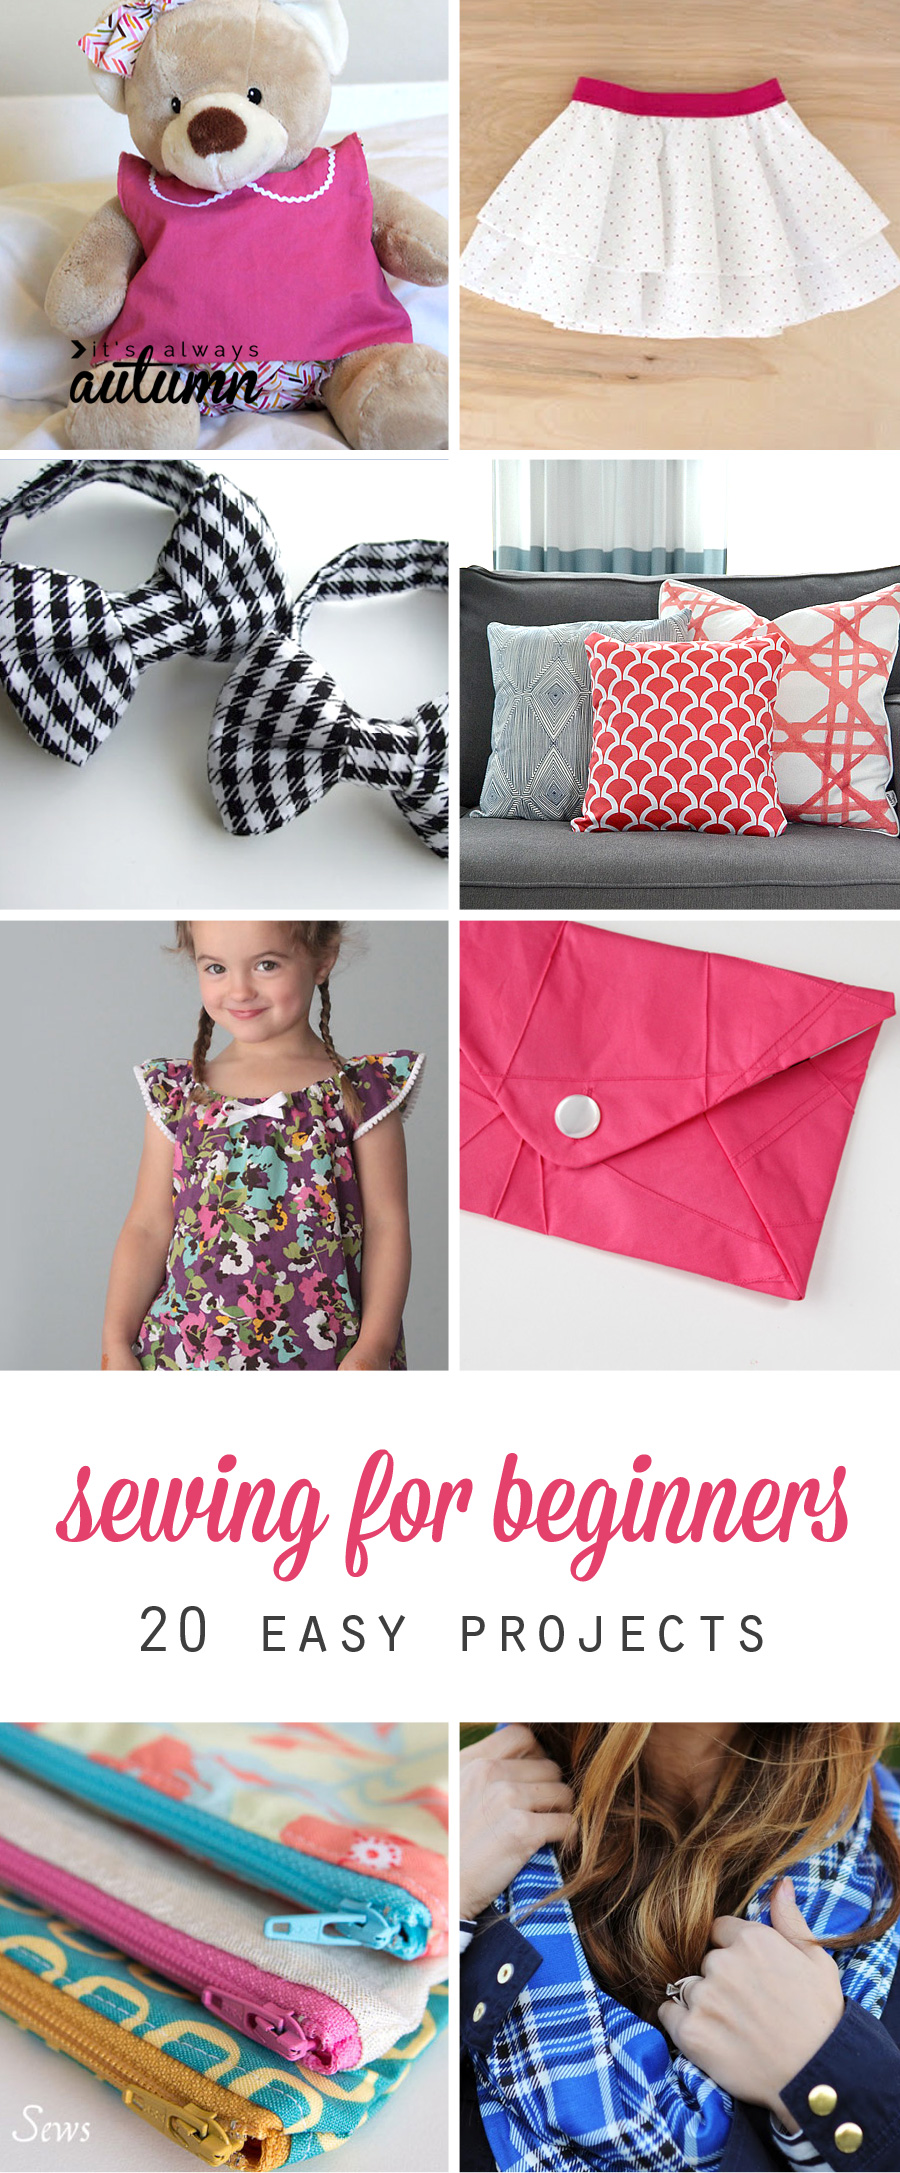 20 easy sewing projects for beginners - It's Always Autumn